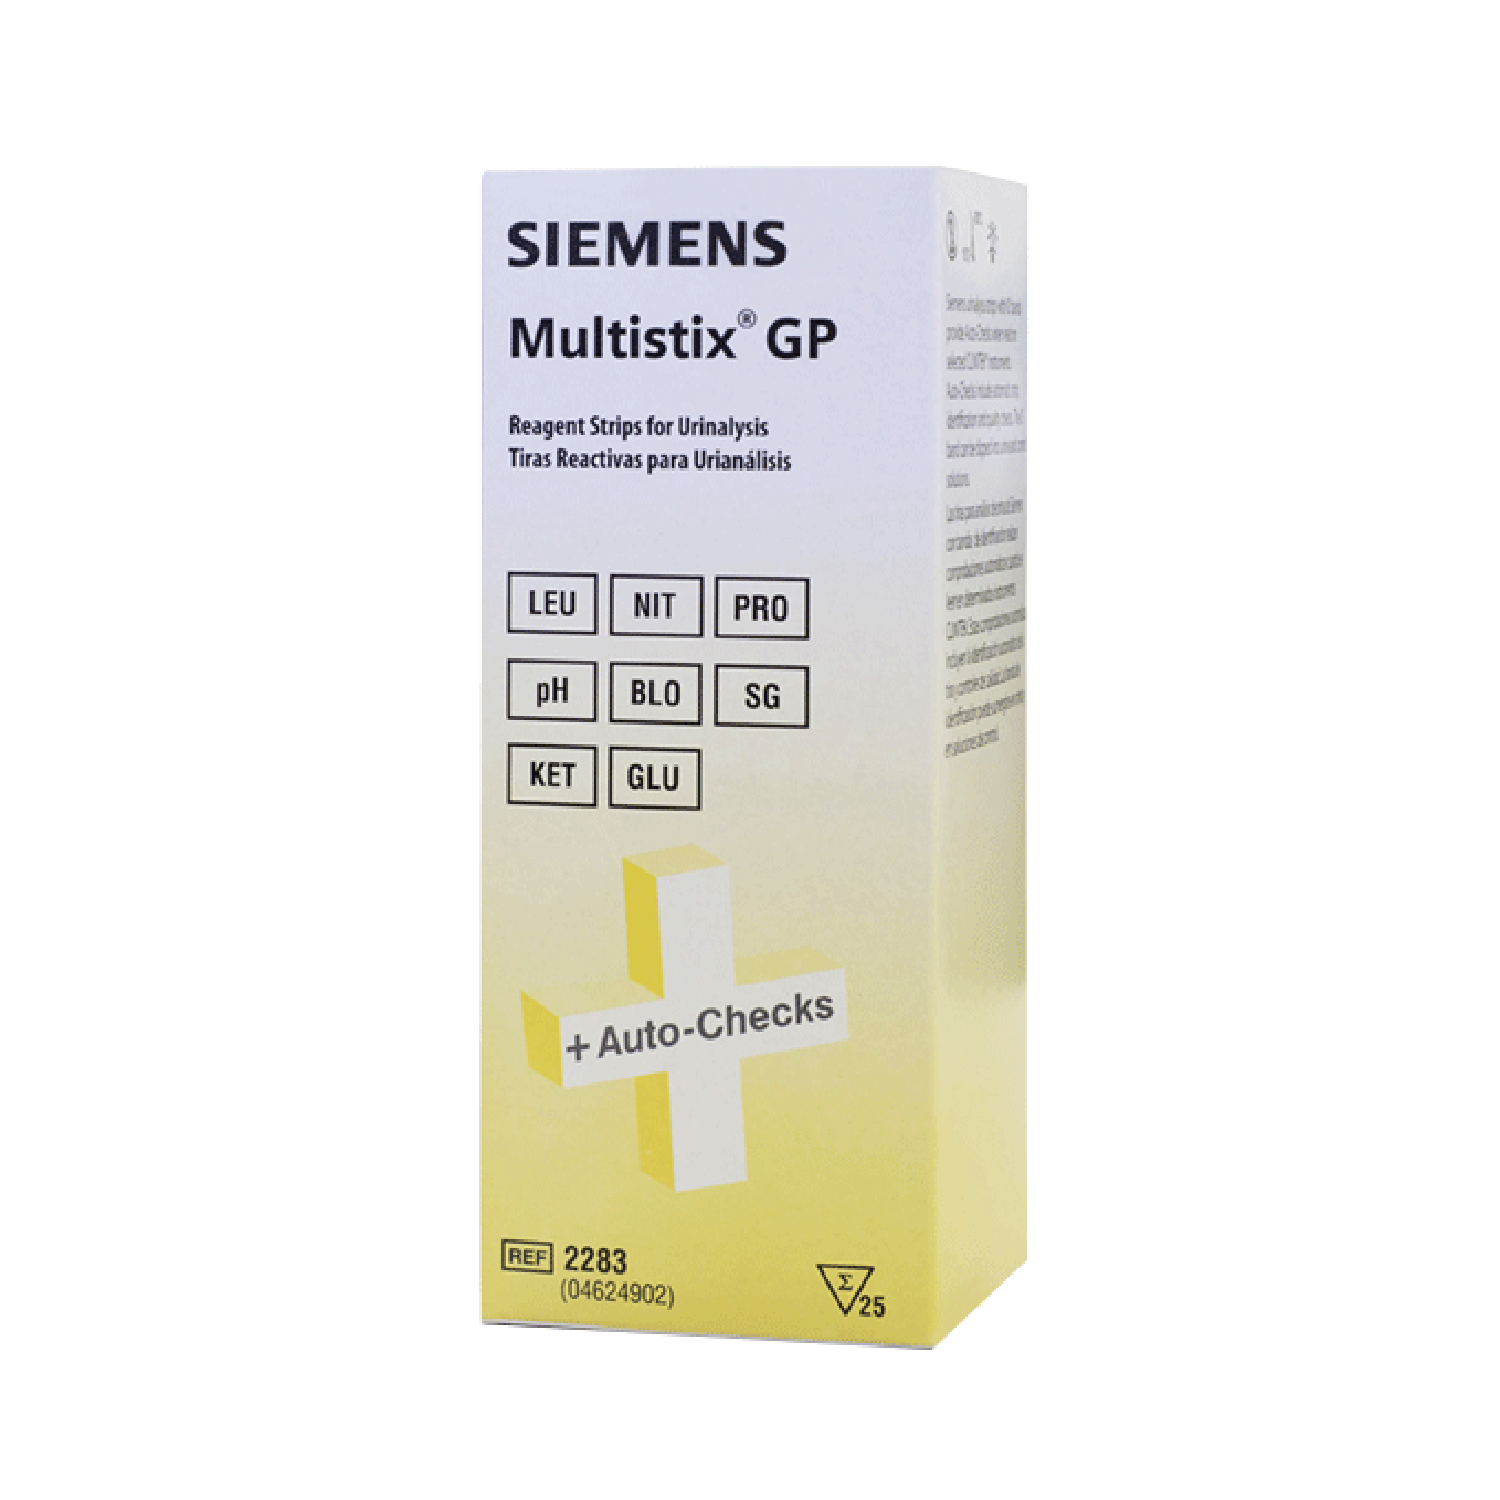 Siemens Multistix GP Reagent Strips for Urinalysis | Pack of 25